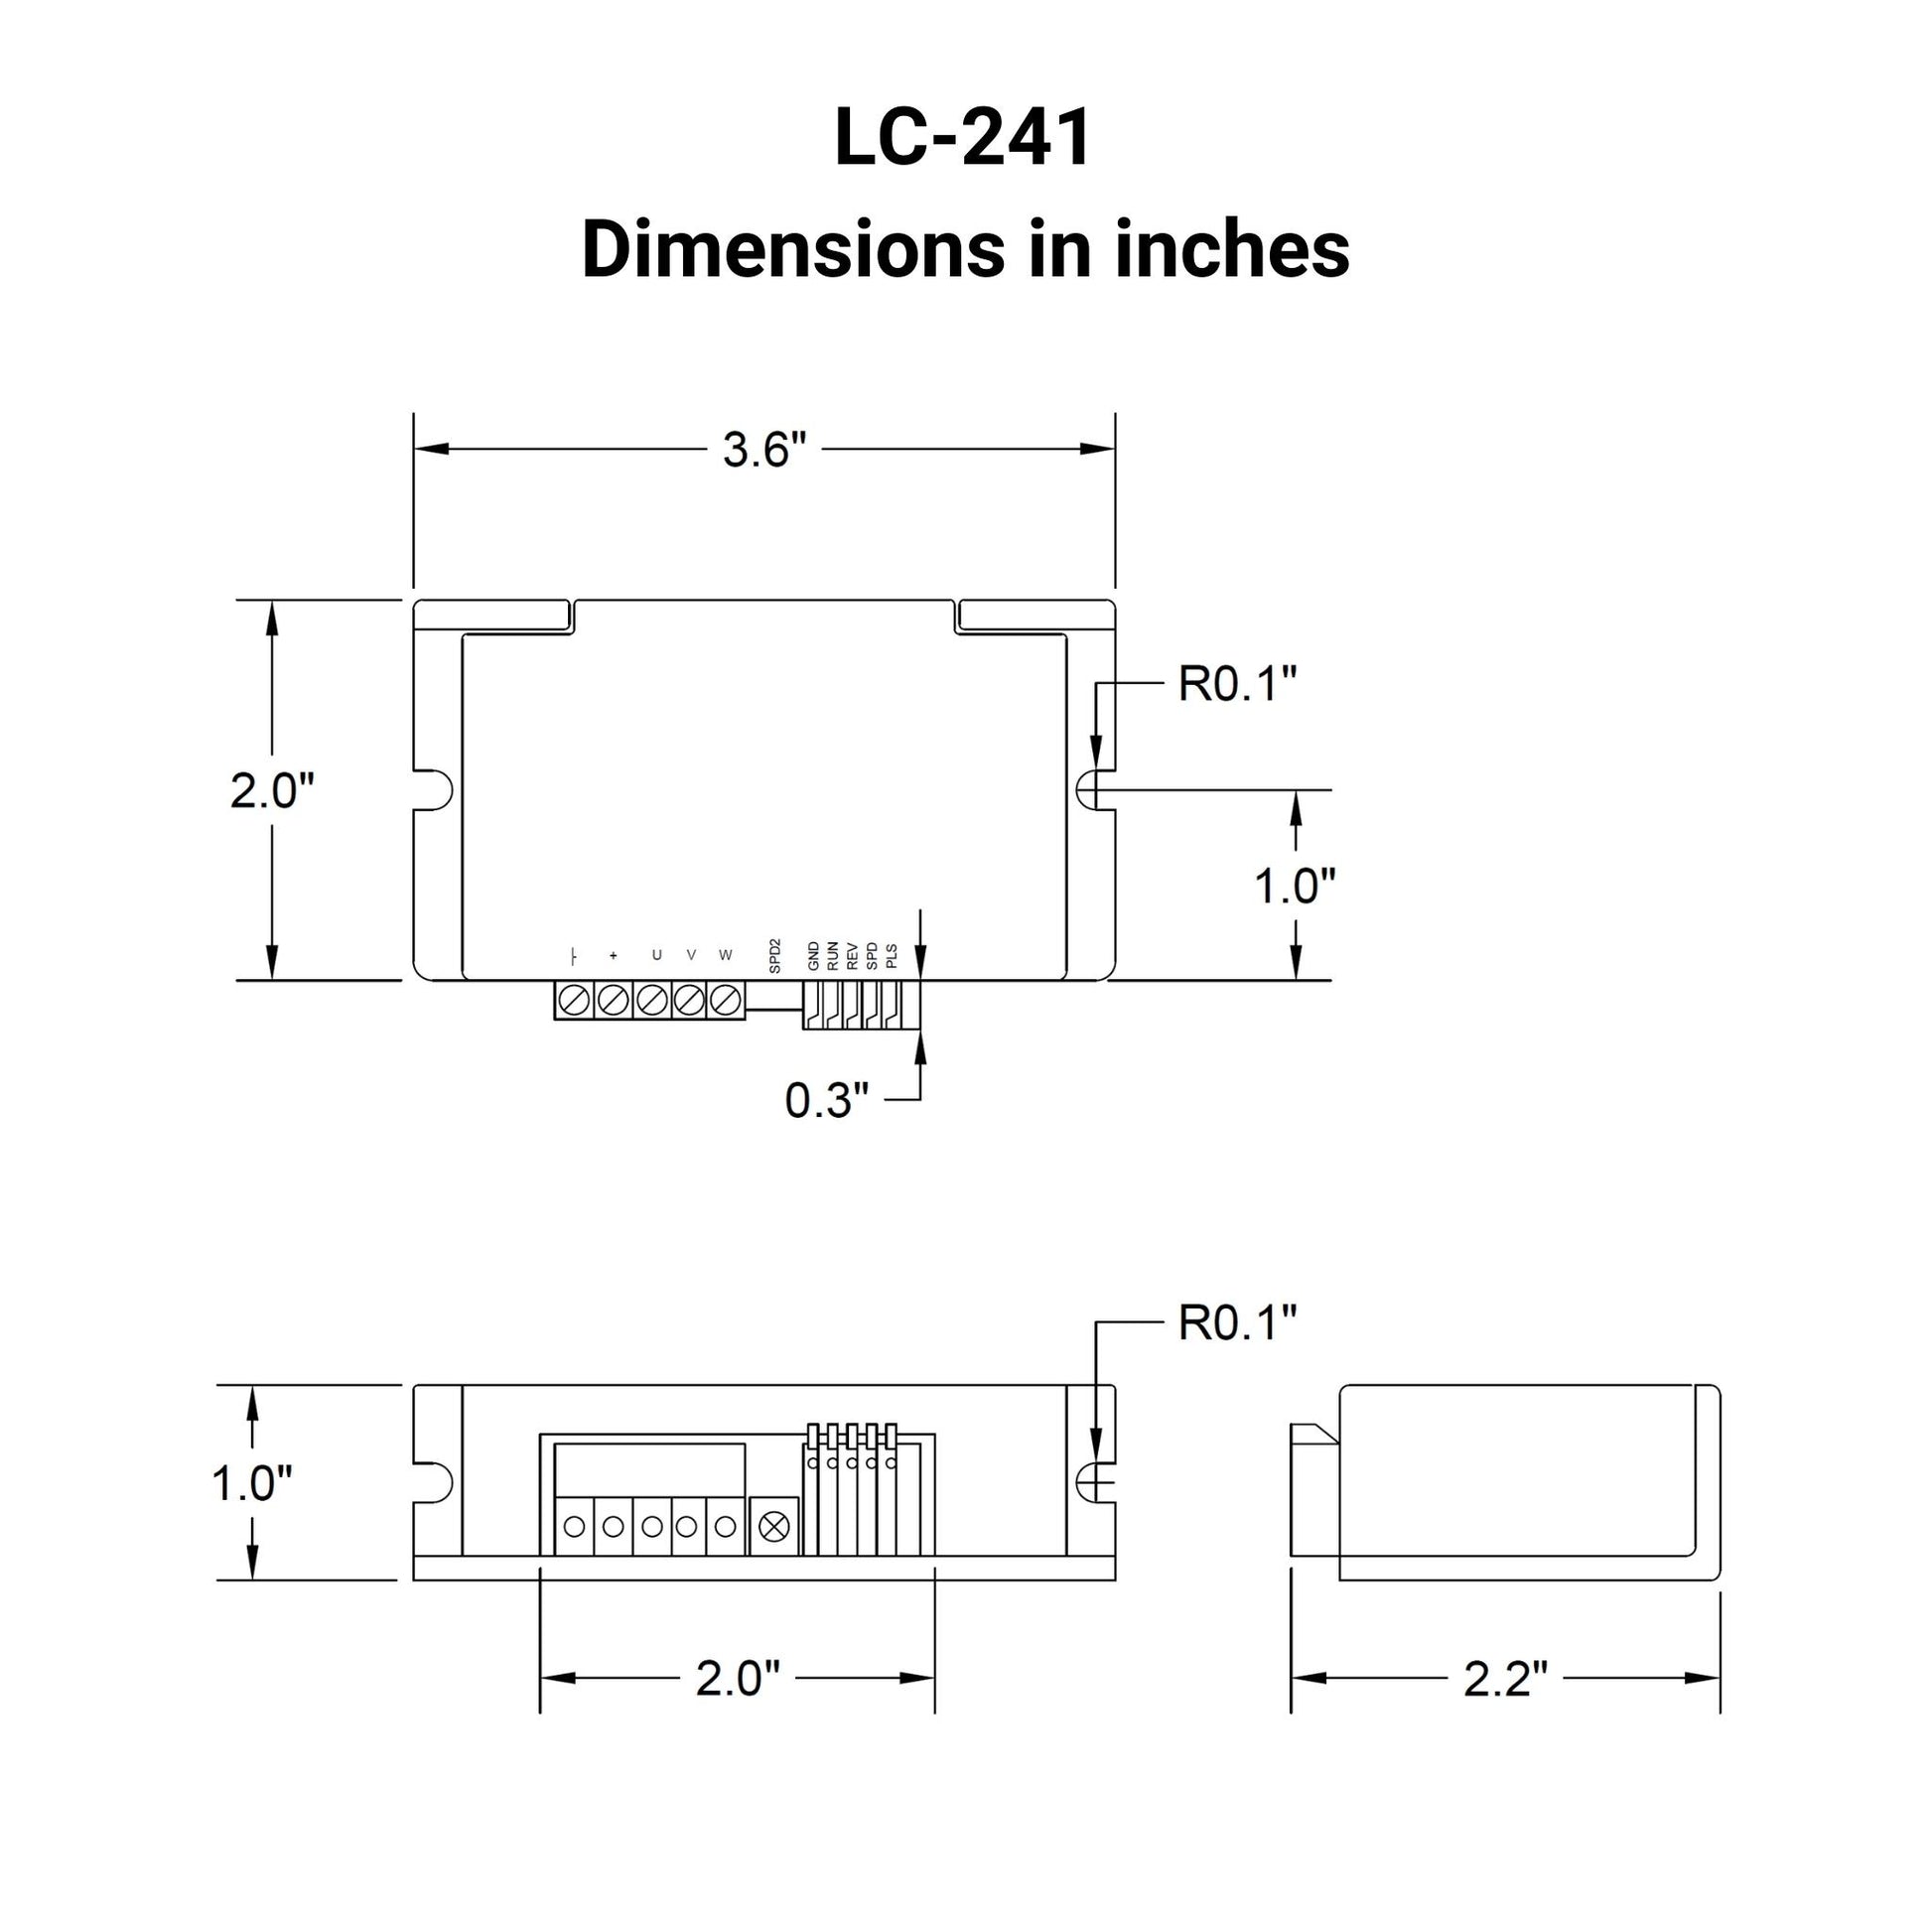 LC-241 brushless DC motor controller Dimensions in inches